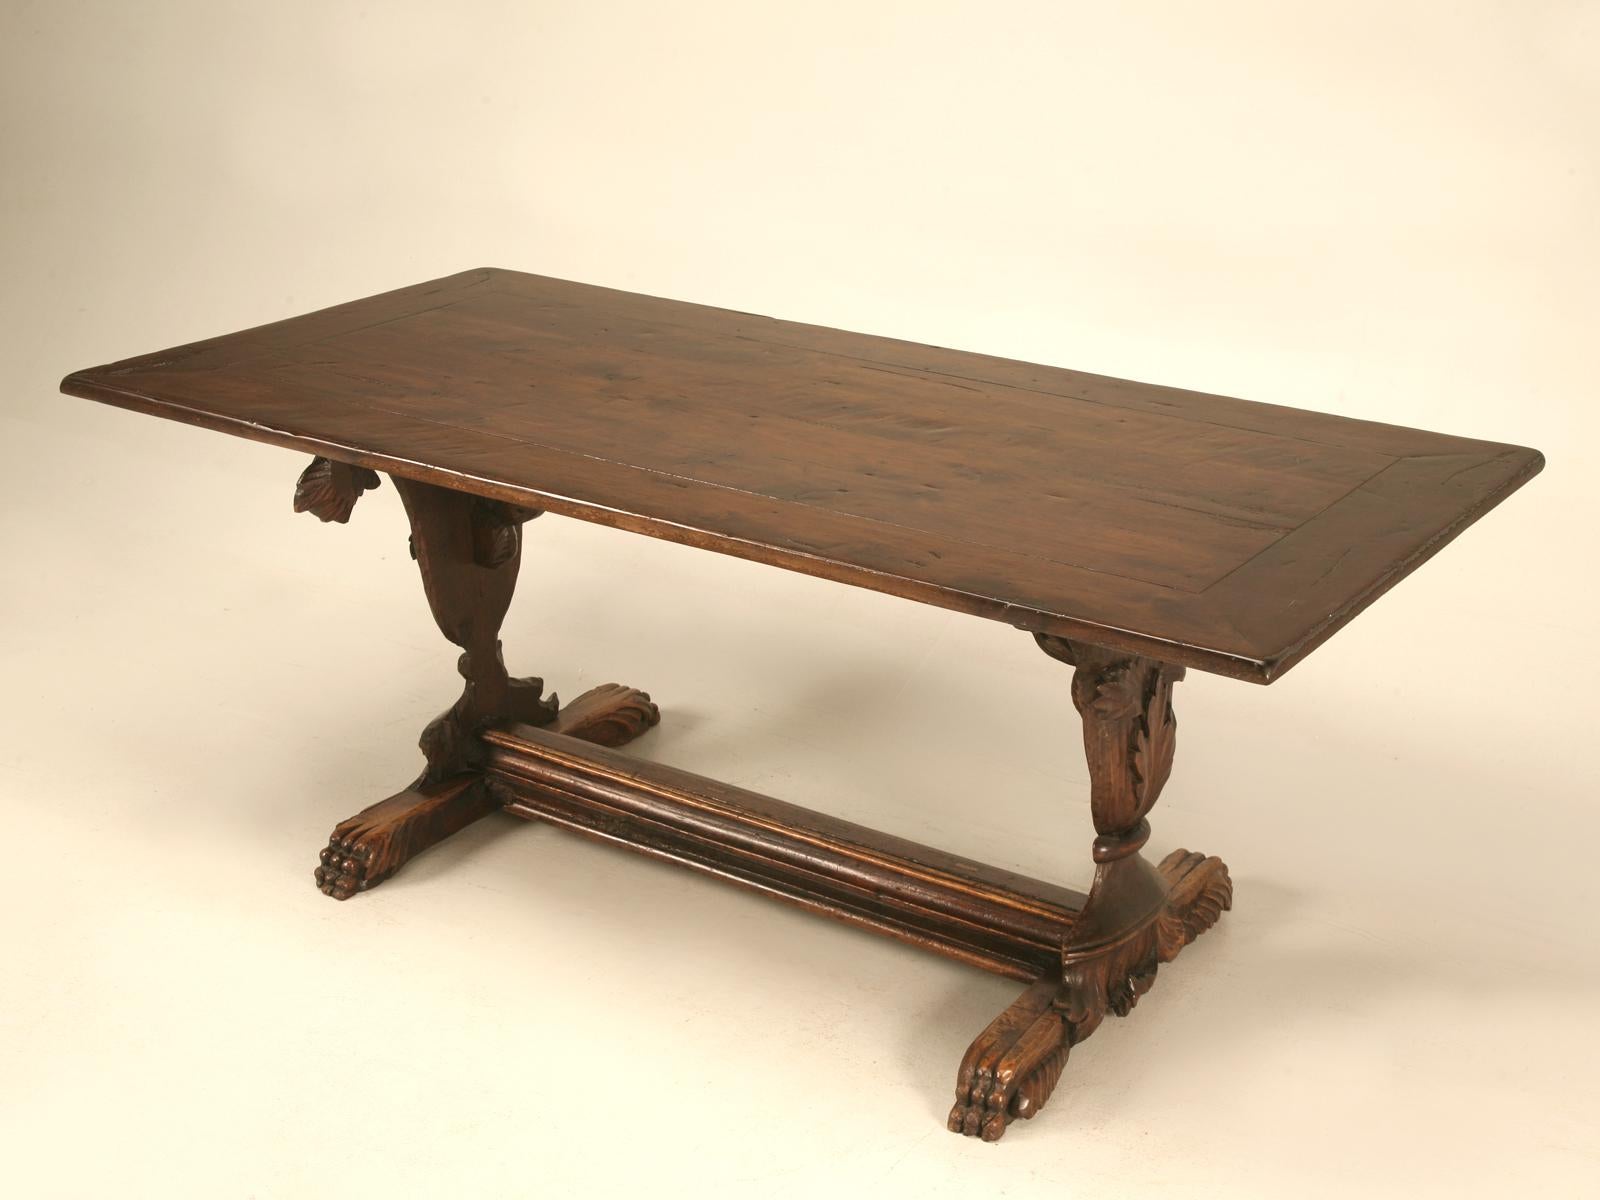 18th century hand carved solid walnut trestle table. This table offers breathtaking beauty with its incredible urn-form pedestals overflowing with decorative leaves and vines. Sturdy and solid construction showcase old world craftsmanship, as do the